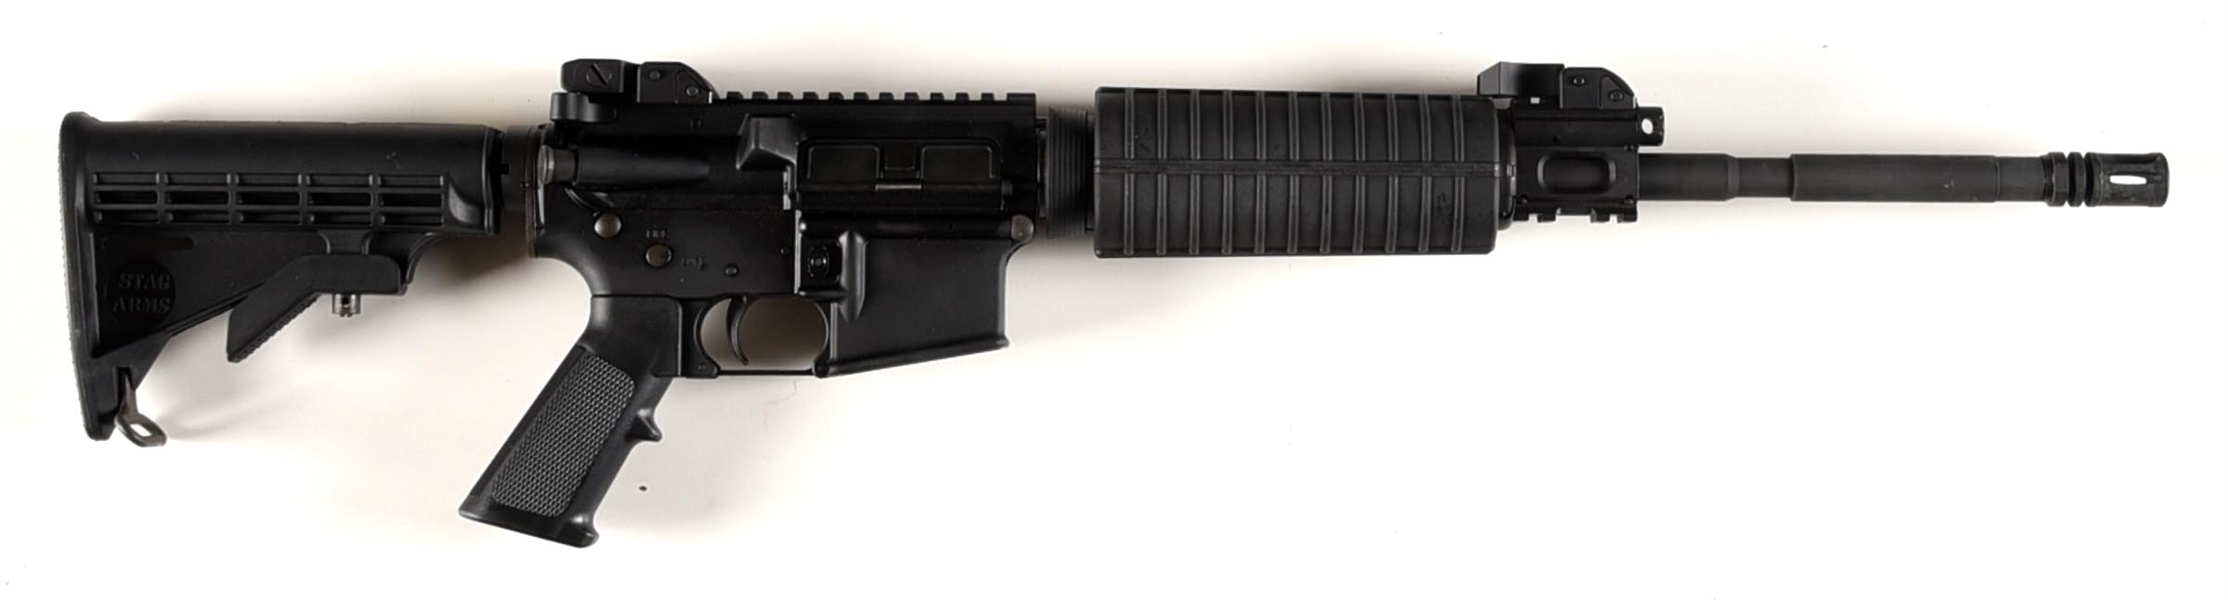 (M) STAG ARMS STAG-15 SEMI AUTOMATIC CARBINE.